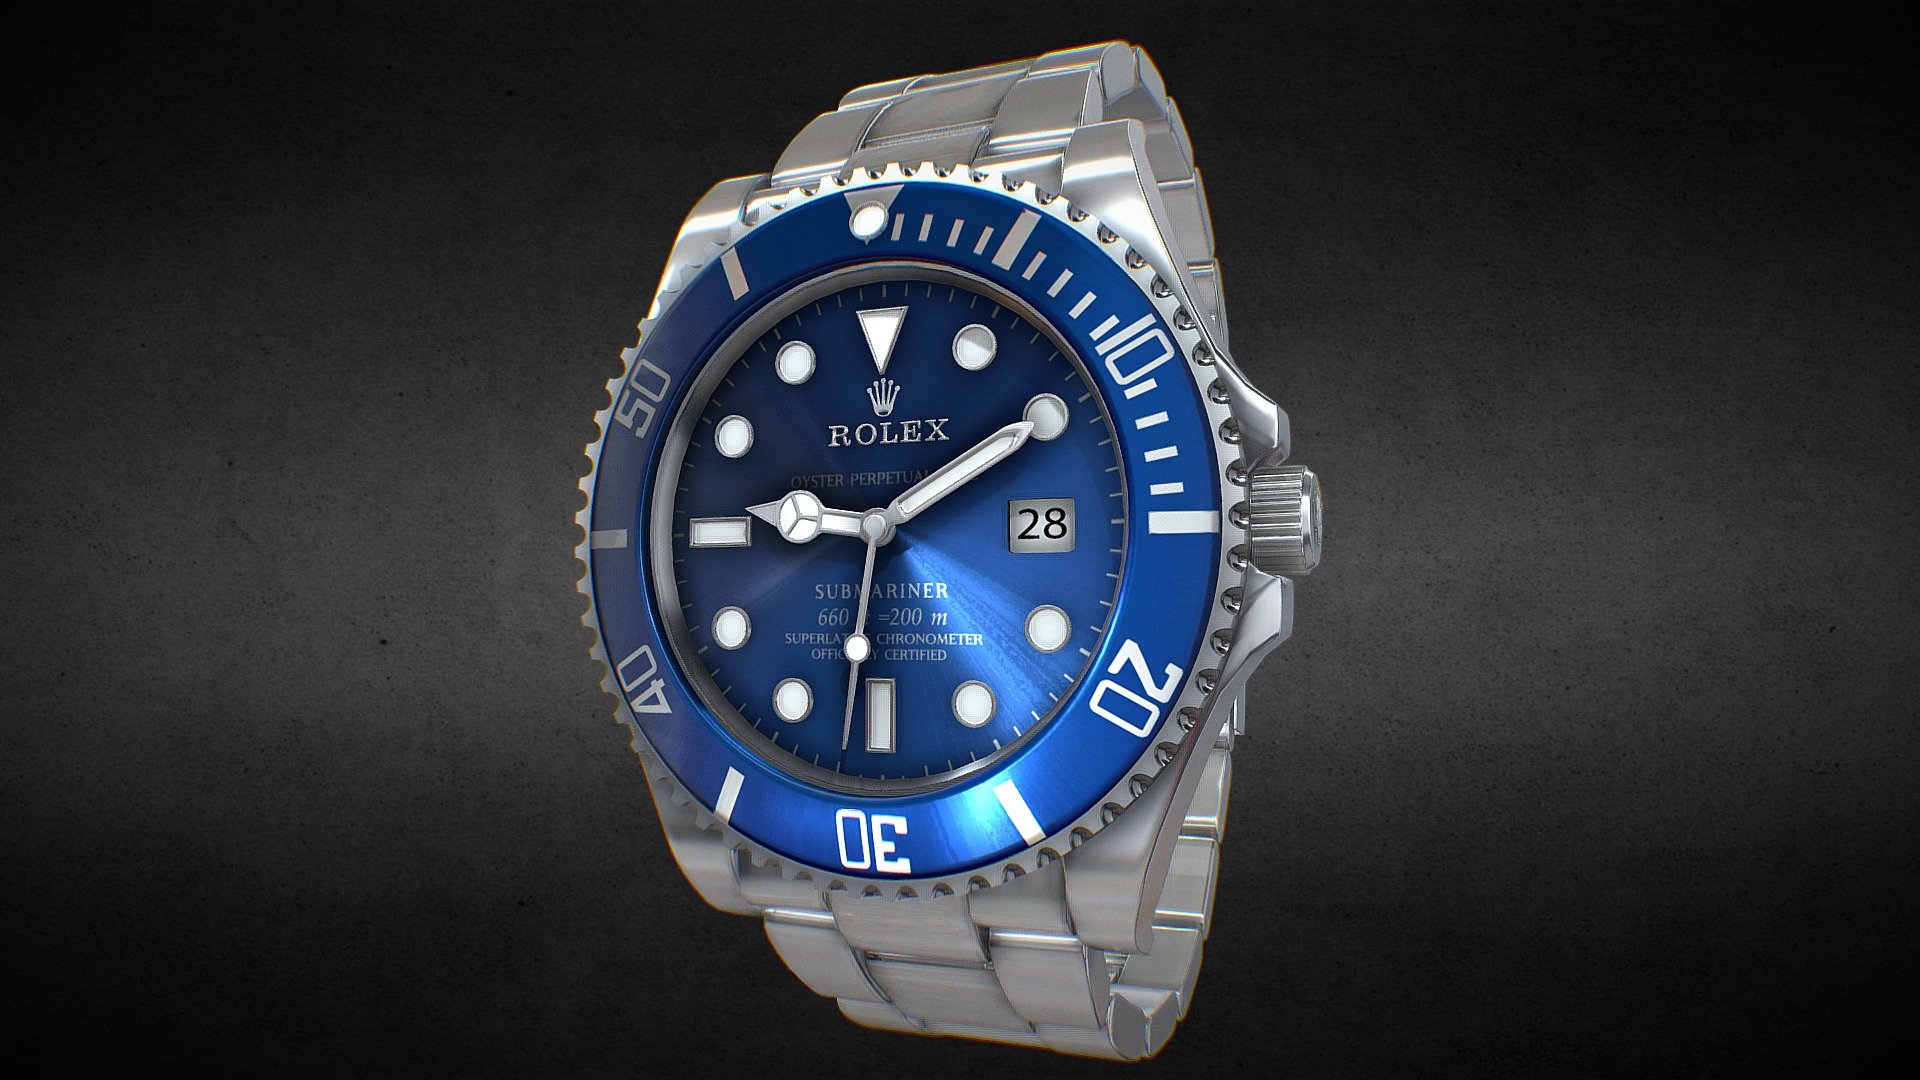 Awesome stainless steel Rolex Submariner Date White Gold Men’s Watch 116619LB  watch․
Use for Unreal Engine 4 and Unity3D. Try in augmented reality in the AR-Watches app. 
Links to the app: Android, iOS

Currently available for download in FBX format.

3D model developed by AR-Watches

Disclaimer: We do not own the design of the watch, we only made the 3D model 3d model